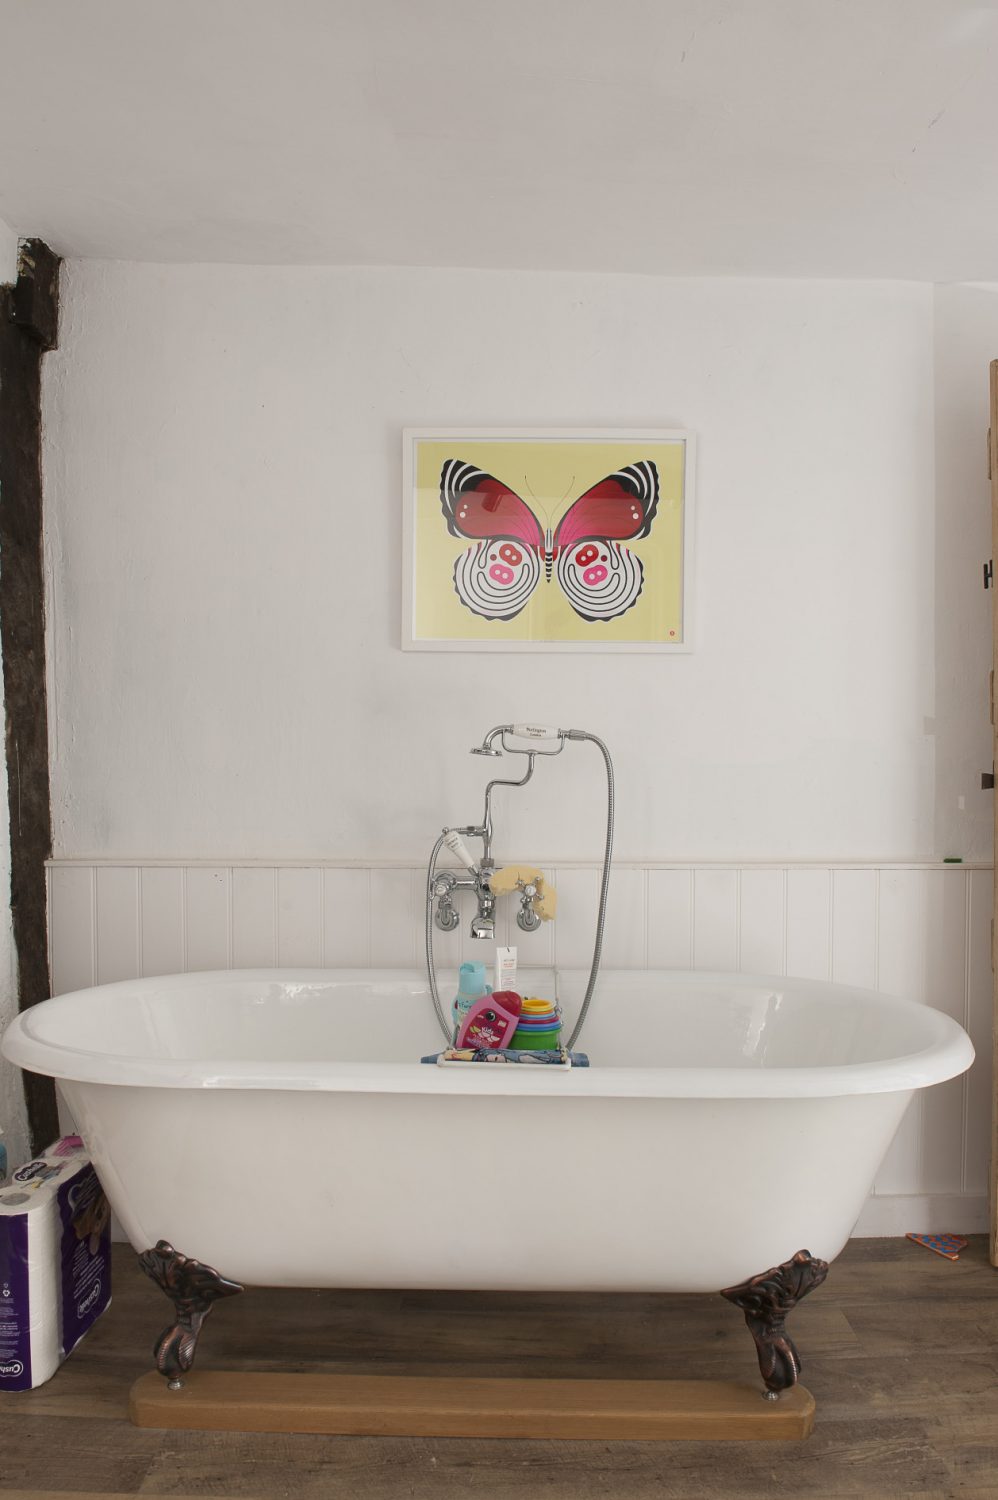 the butterfly print above the bath adds a playful and colourful touch to the otherwise pale interior